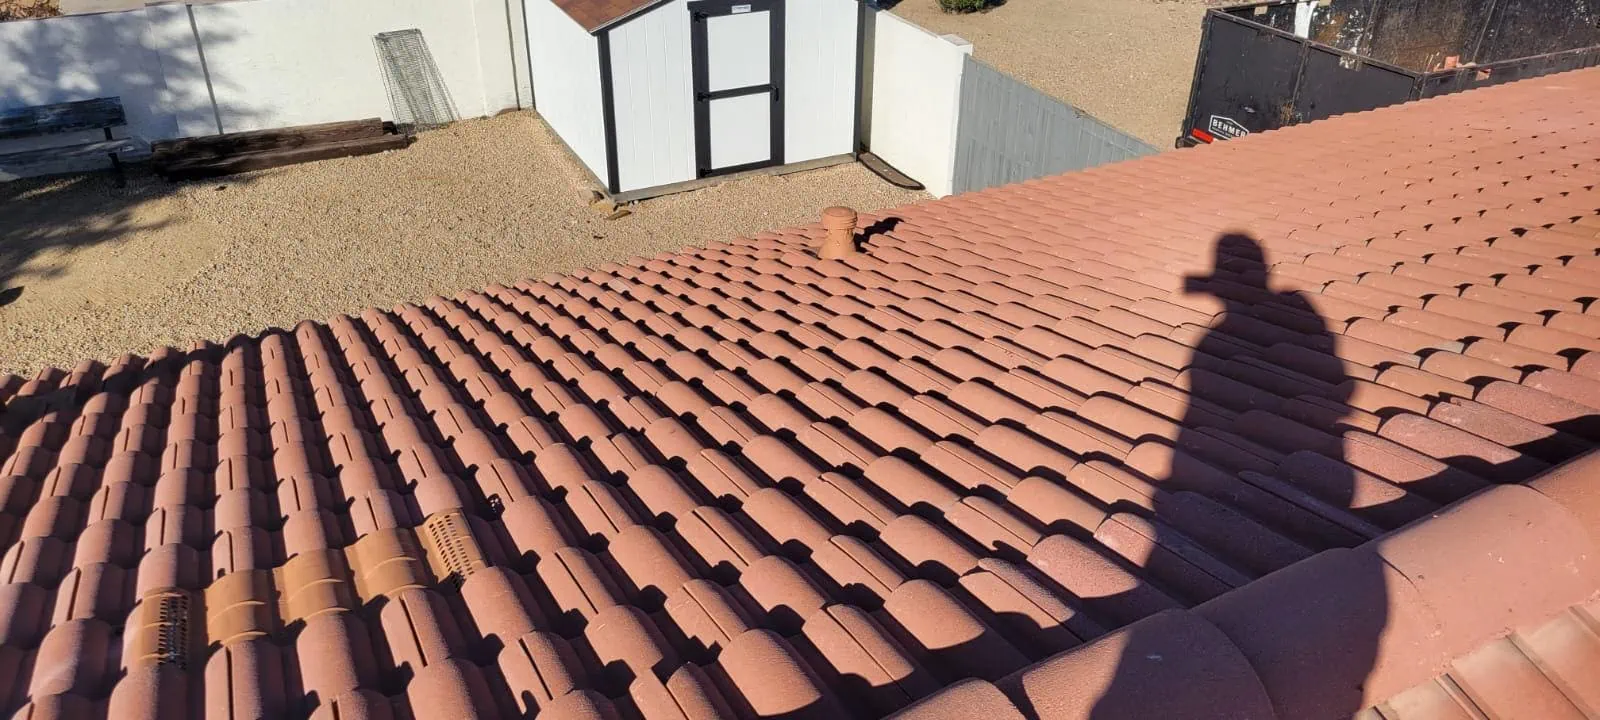 tile roofing in phoenix az quality job done by behmer